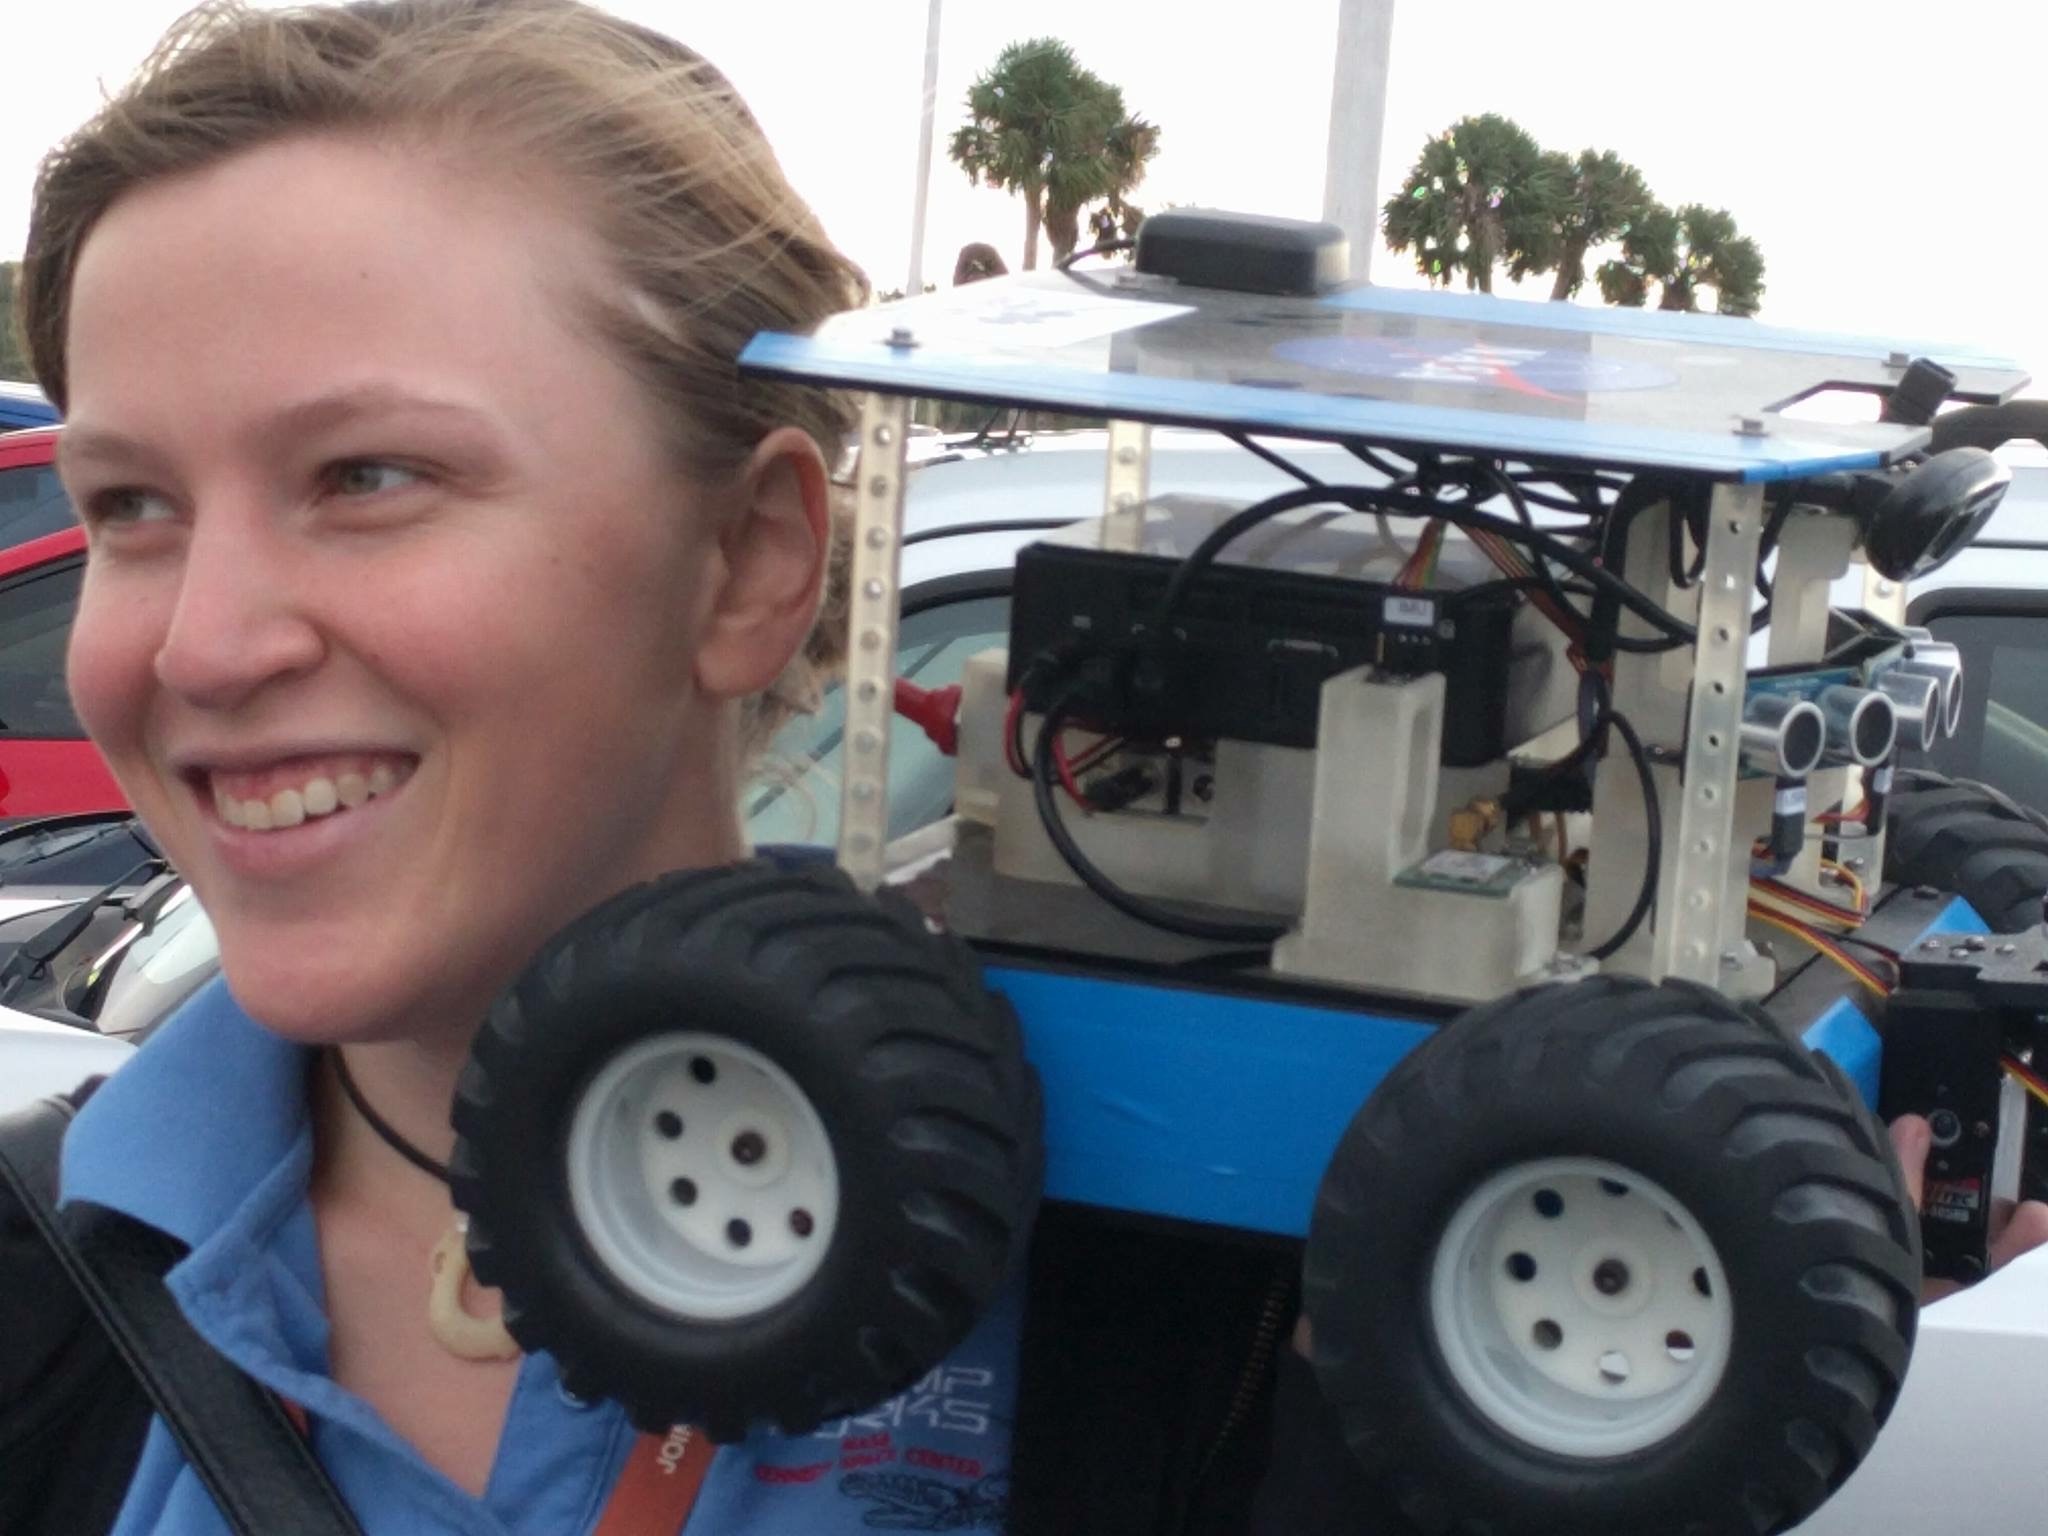 Raewyn Duvall, Iris deputy program manager, shown with a Swarmie during her first internship at Kennedy Space Center.